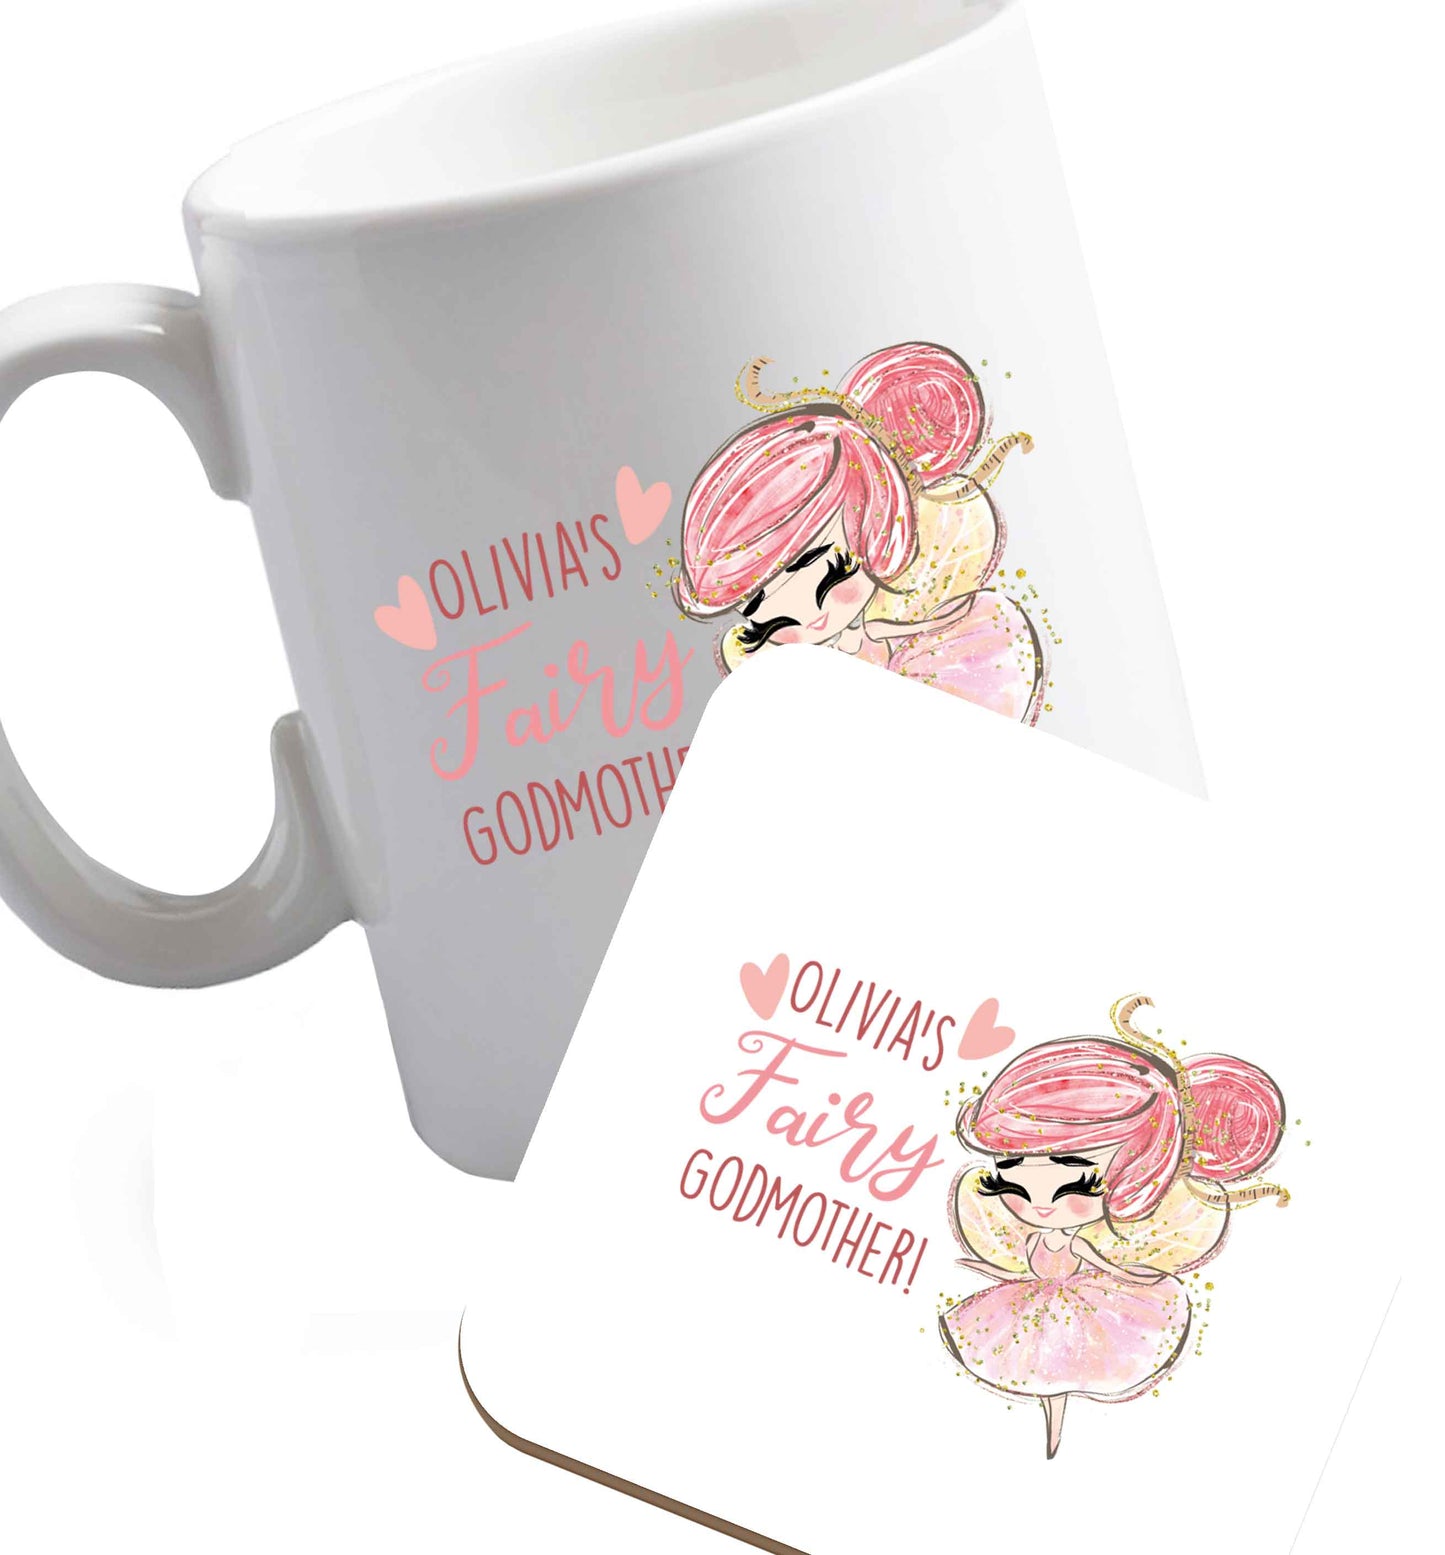 10 oz Personalised fairy Godmother - red hair  ceramic mug and coaster set right handed